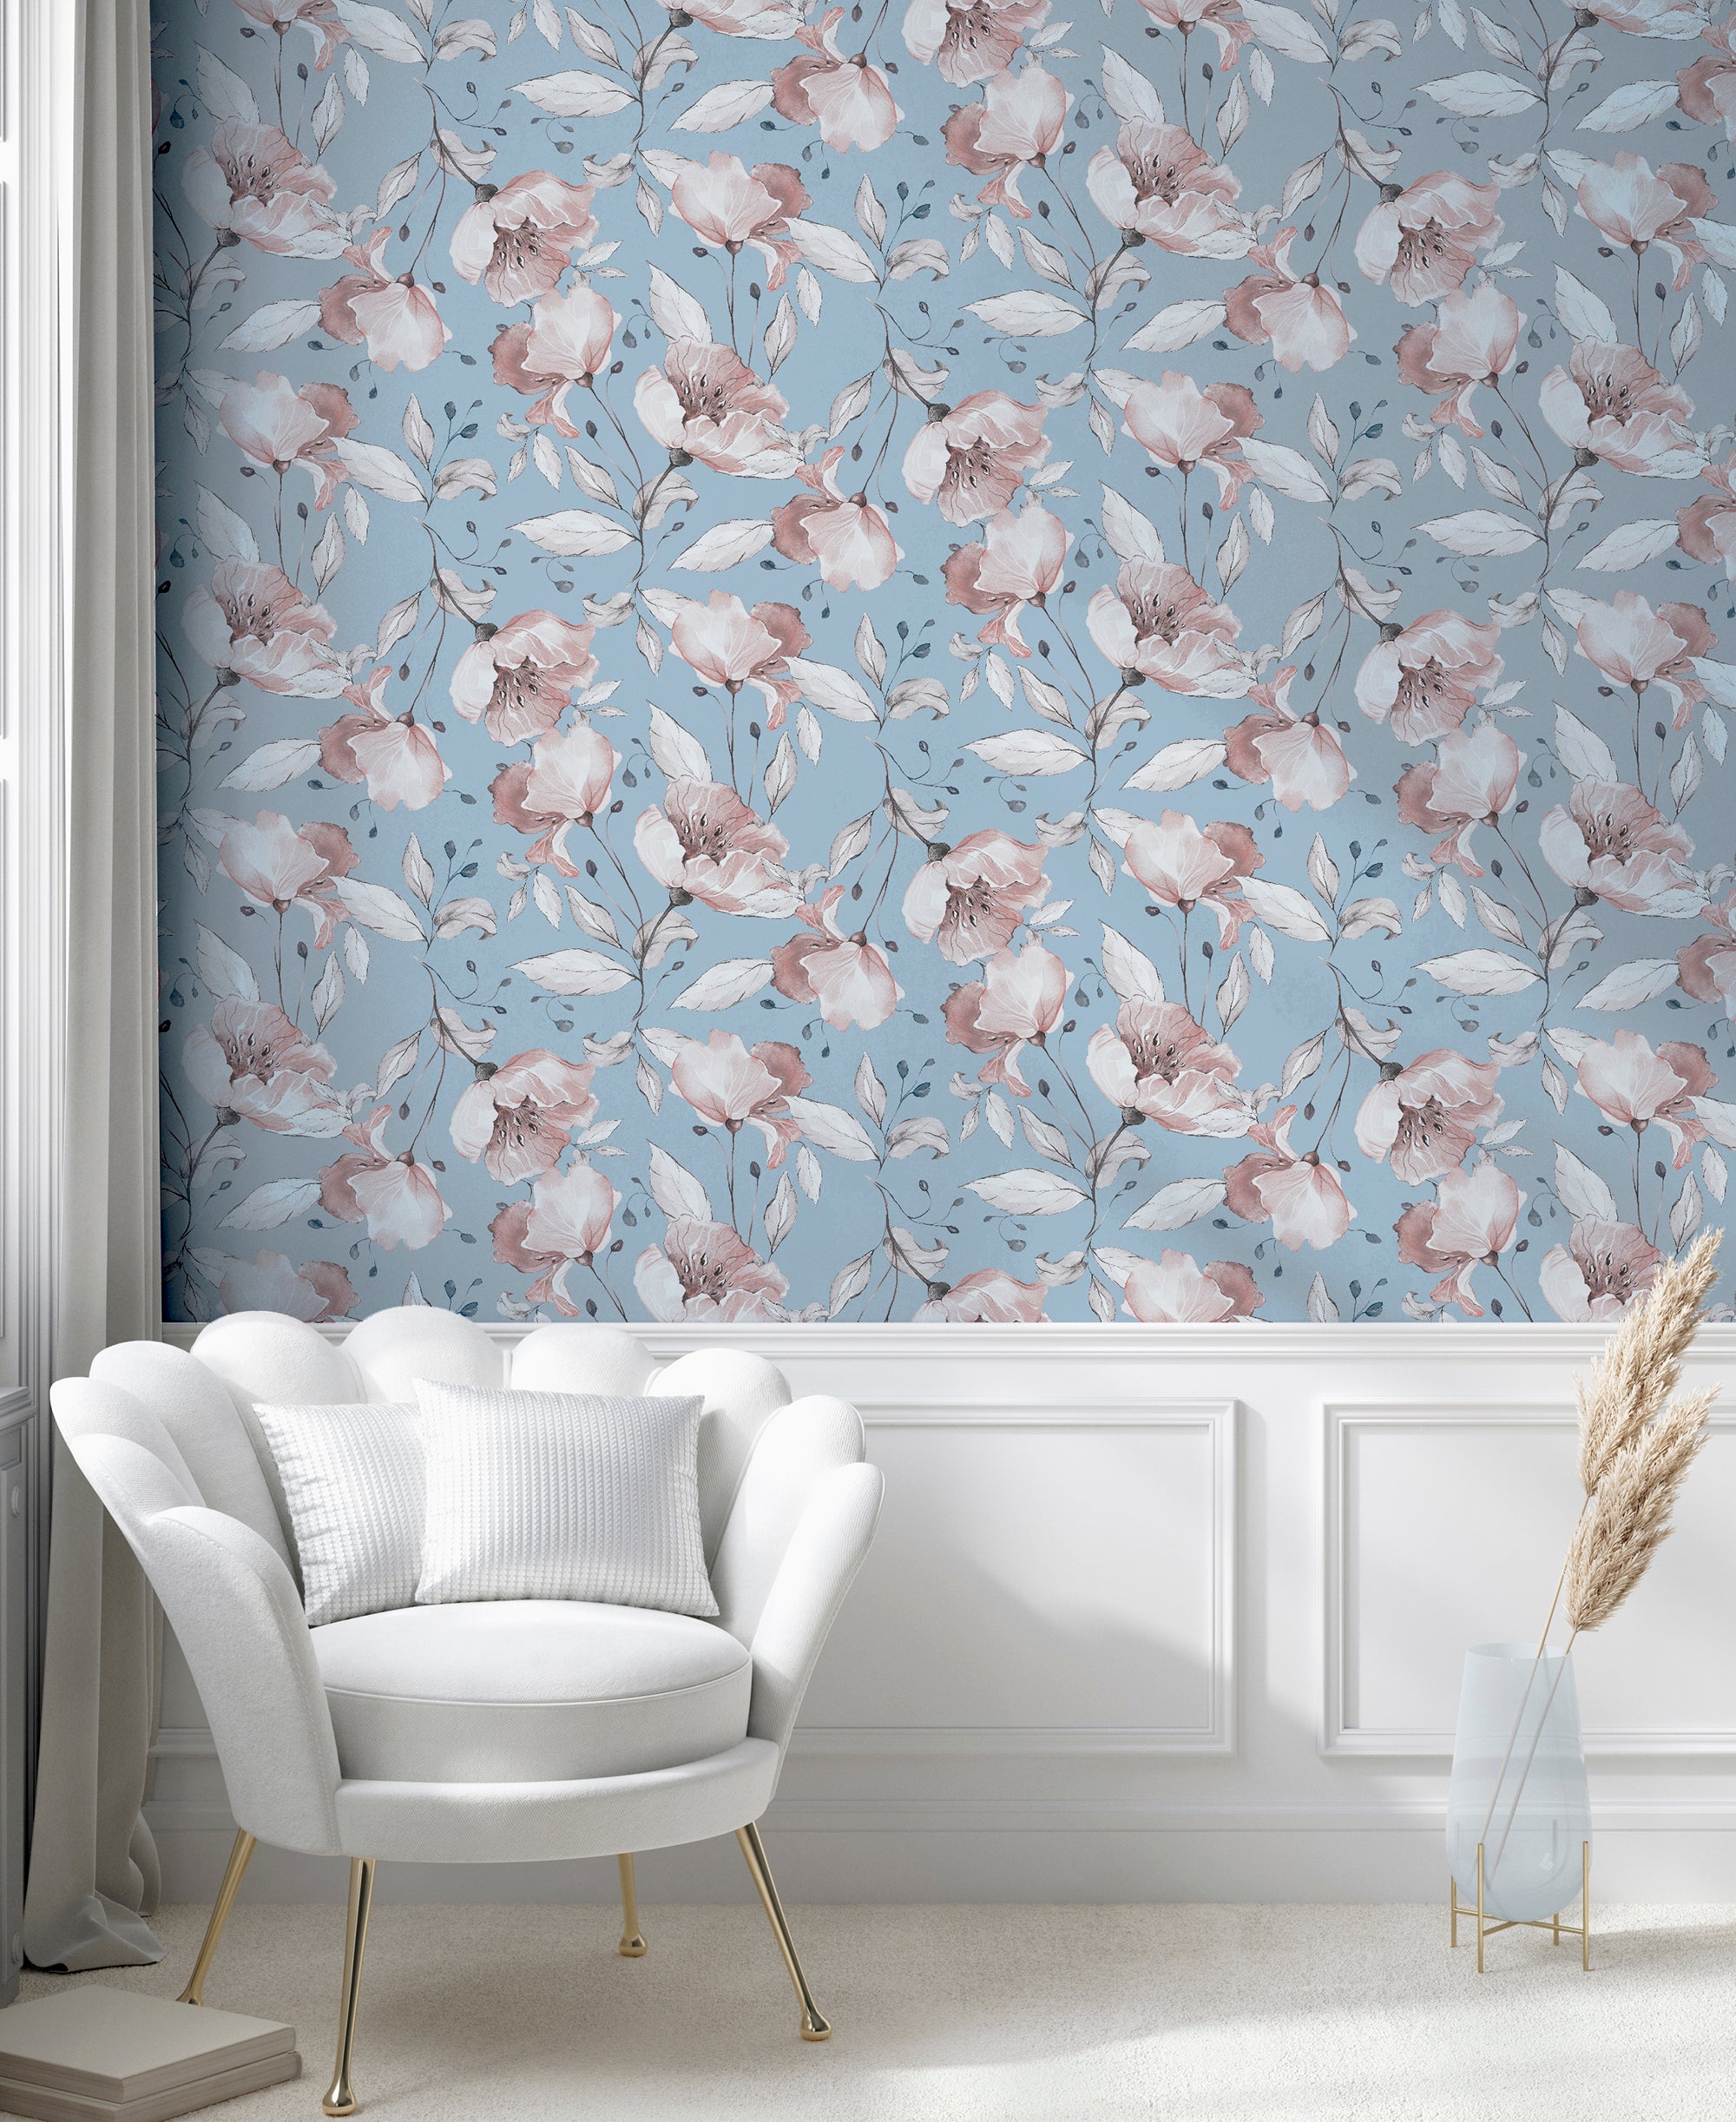 Arthouse Flowing Floral Pink Multicolored Paste the Paper Wallpaper –  Arthouse USA Inc.